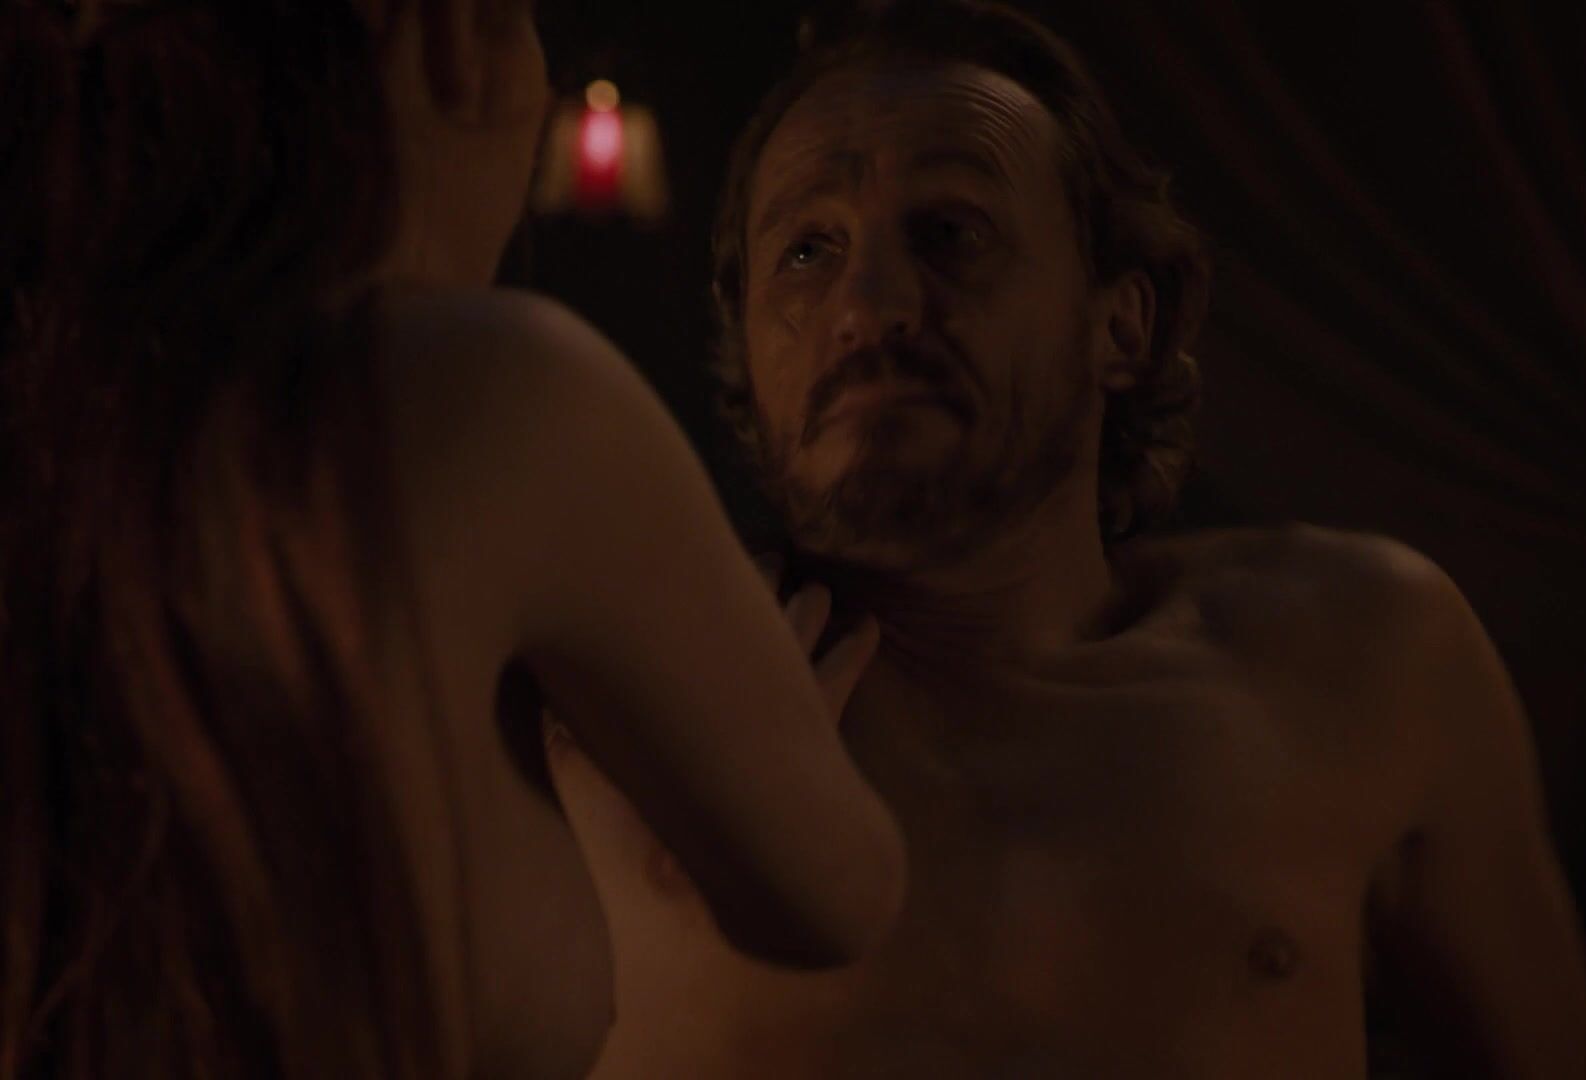 Hardcore Gay Marina Lawrence-Mahrra goes nude in Game of Thrones s08e01 (2019) Gays